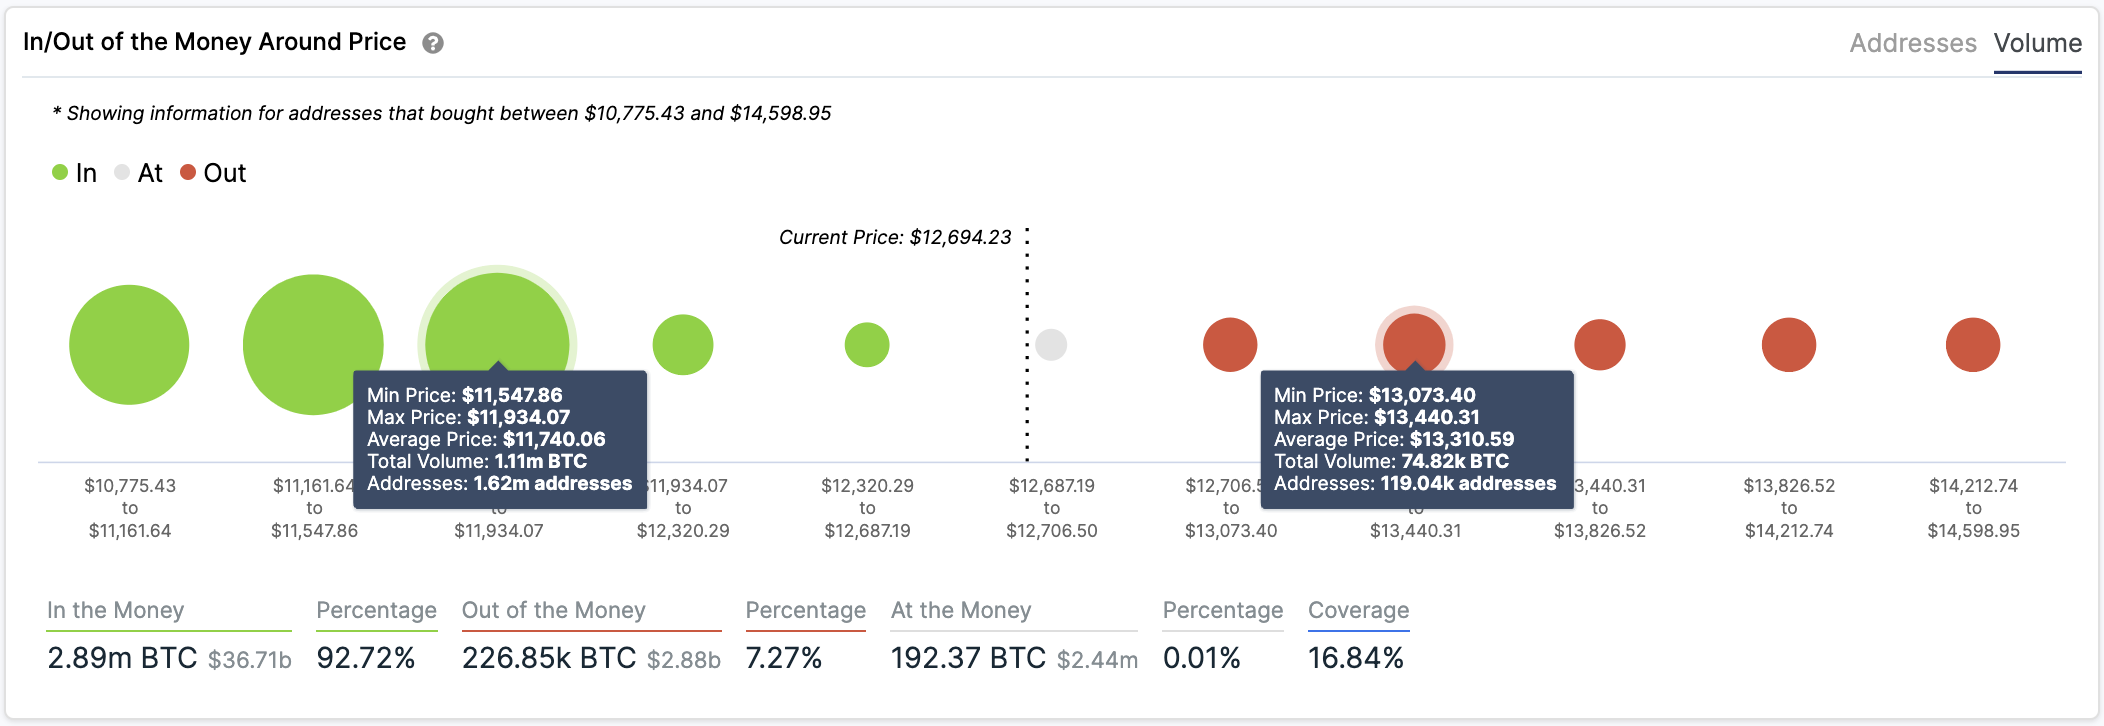 BTC In/Out of the Money Around Price by IntoTheBlock